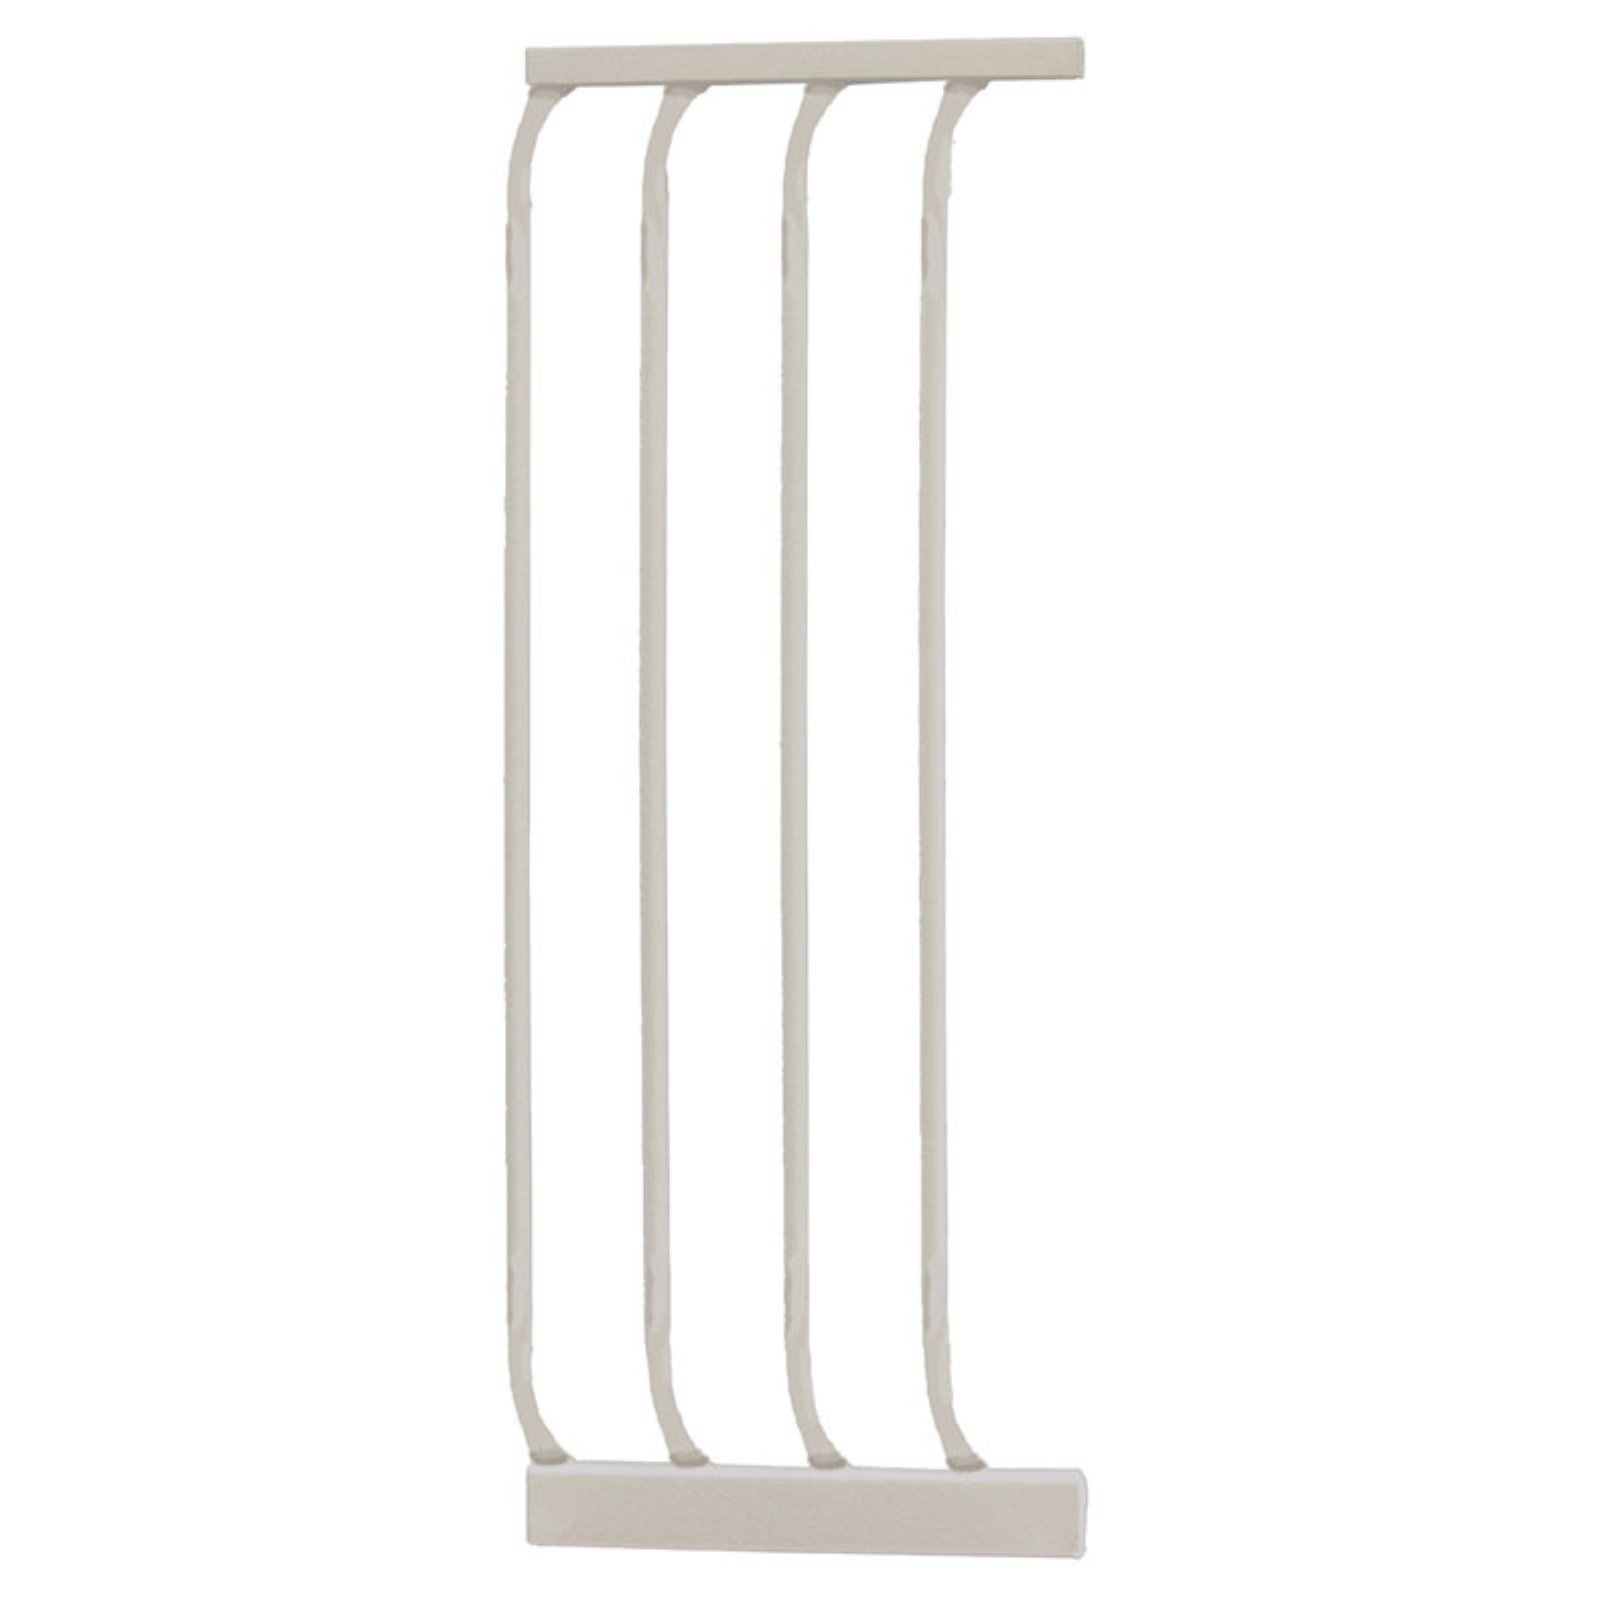 Dreambaby® Chelsea 10.5 inch Baby Gate Extension - image 2 of 2